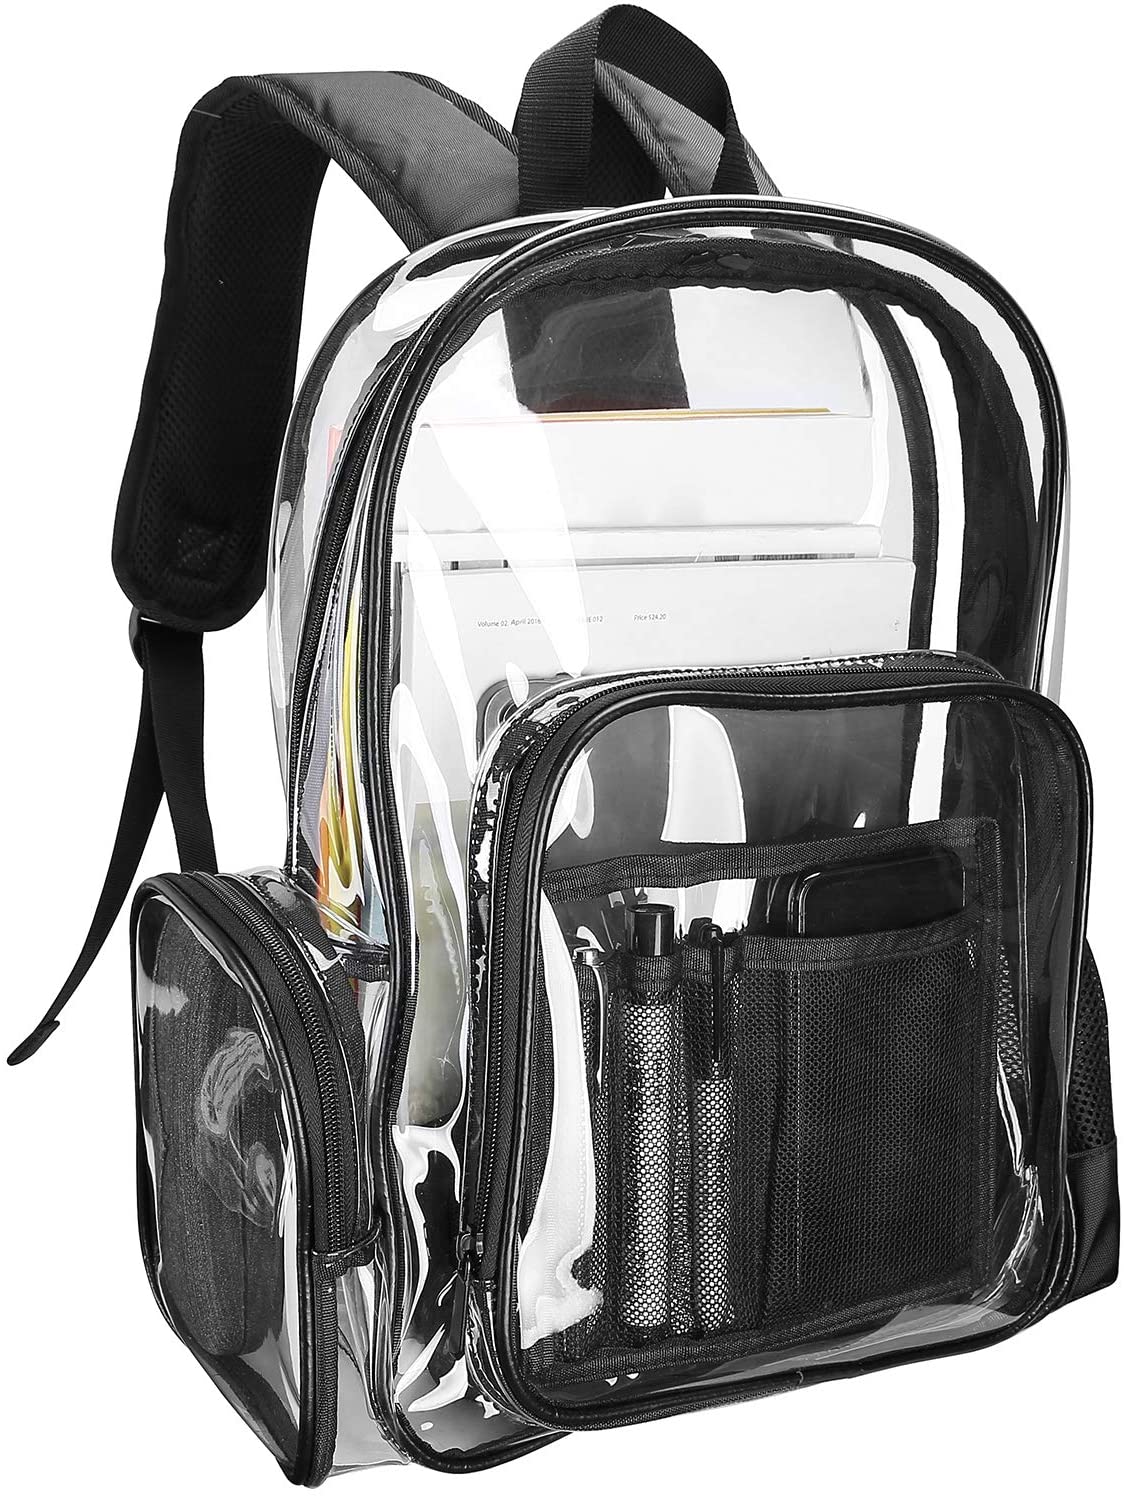 ProCase Heavy Duty Clear Backpack, See Through Backpacks Transparent Clear Large Bookbag for School Work Stadium Security Travel Sporting Events - image 1 of 7